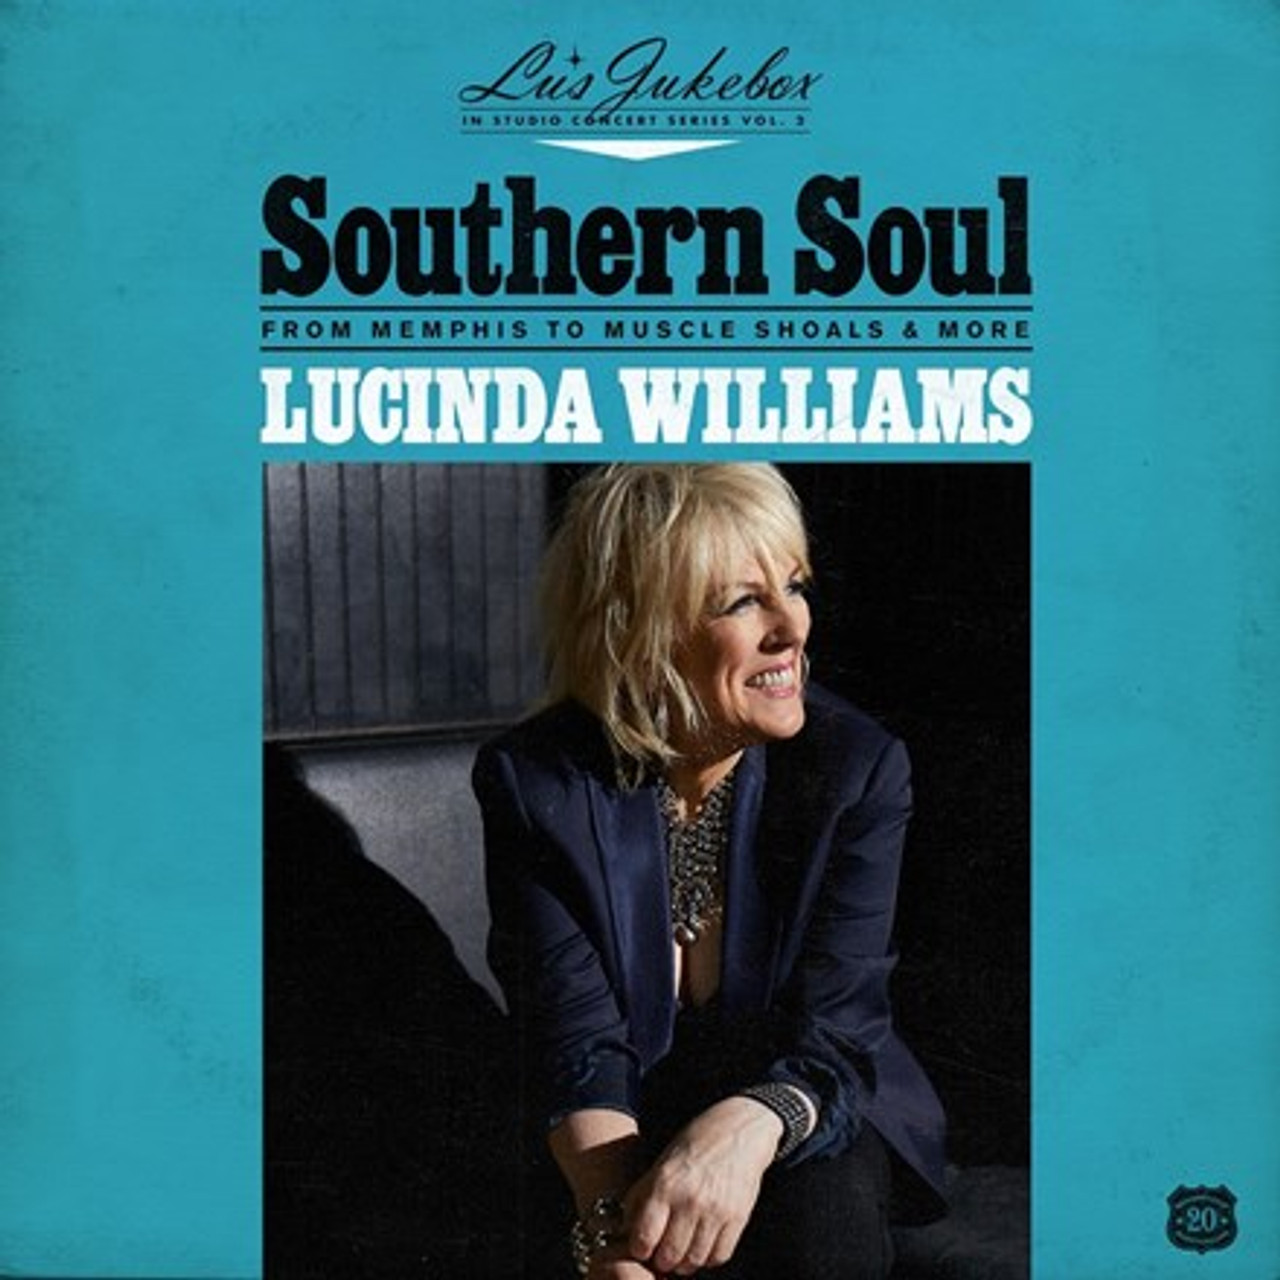 Williams - Lu's Jukebox Vol. 2 Southern Soul: From Memphis to Muscle Shoals (Vinyl LP) - Music